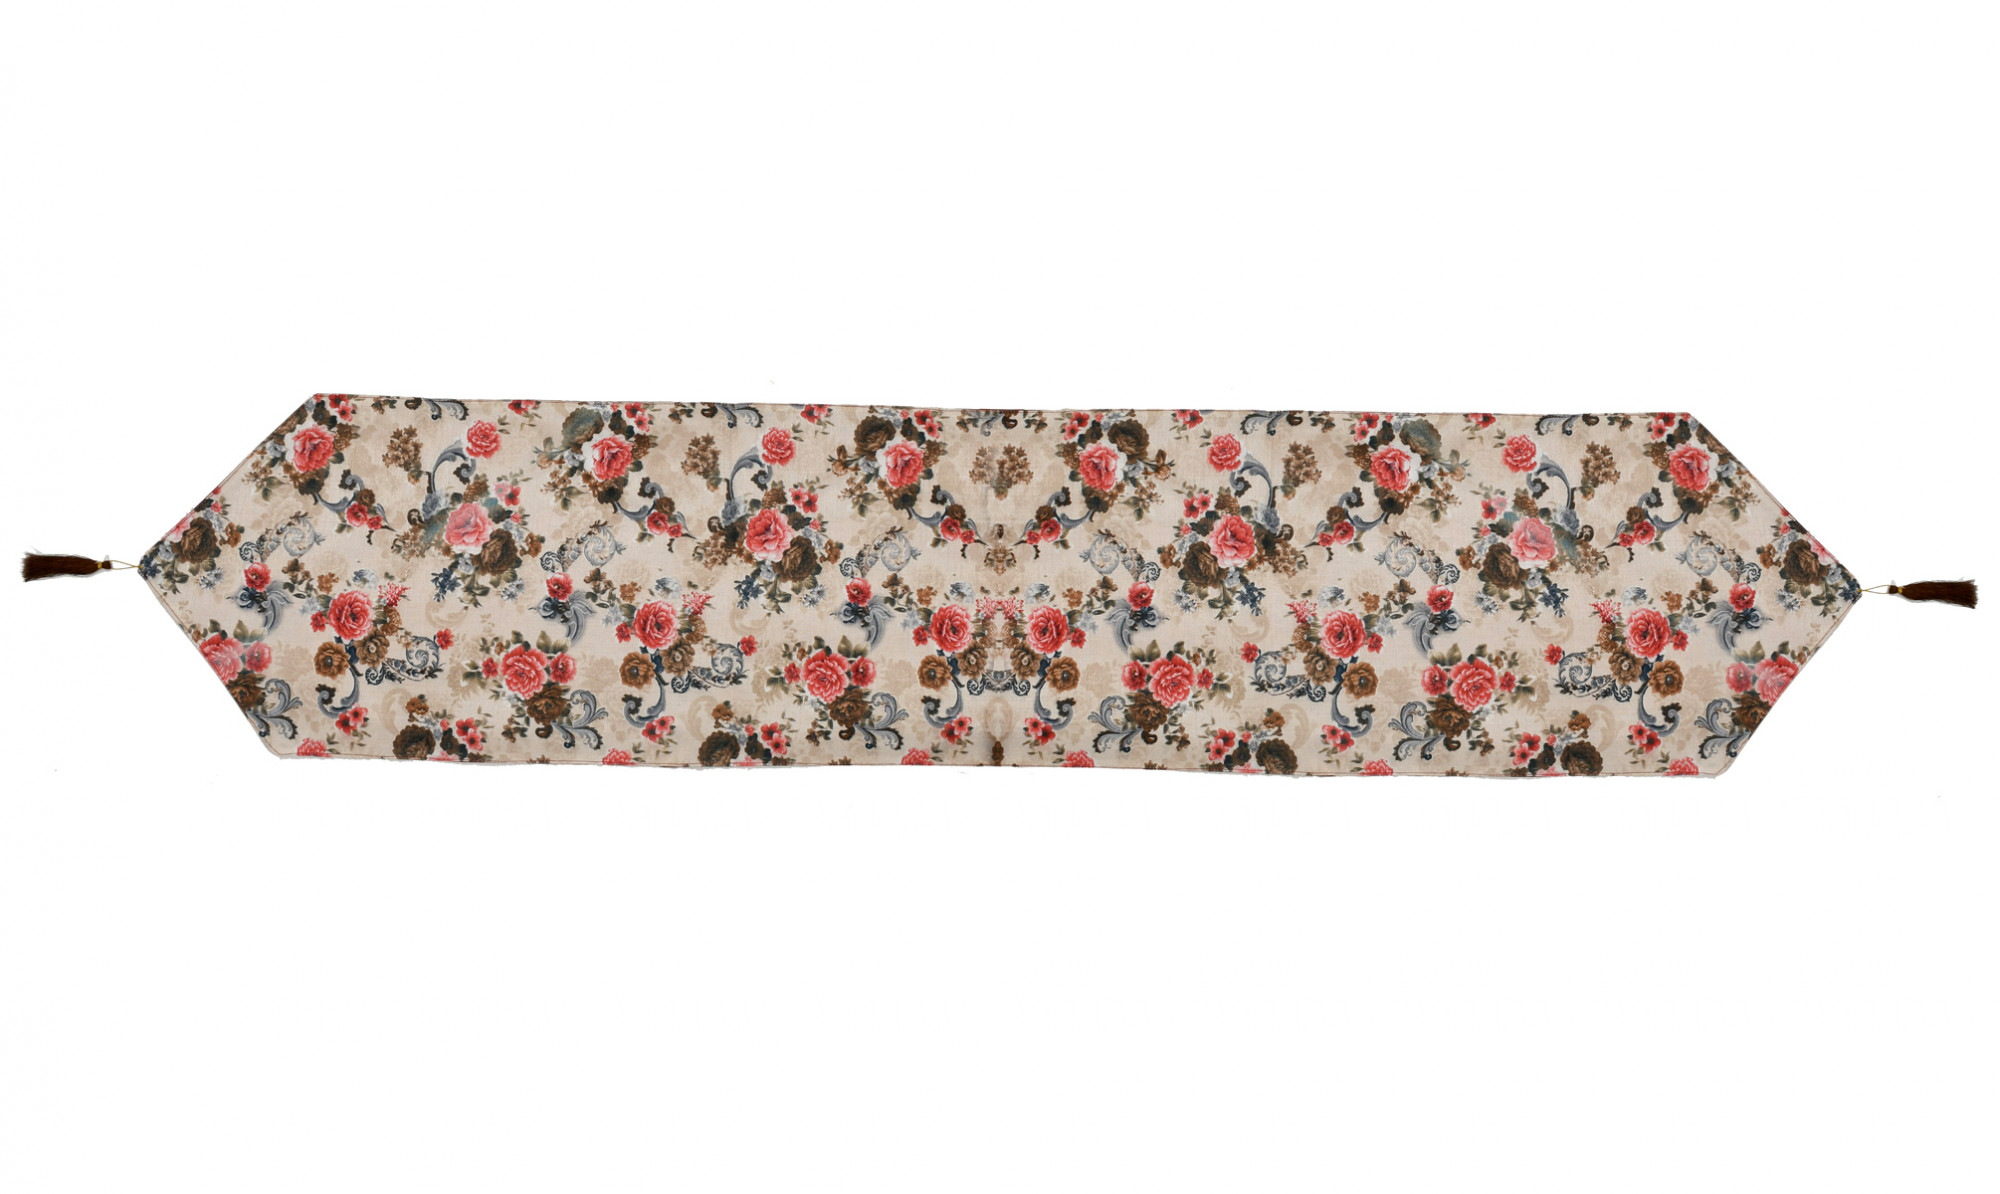 Kuber Industries Flower Design Cotton Table Runner for Family Dinners or Gatherings, Indoor or Outdoor Parties & Everyday Use, 16